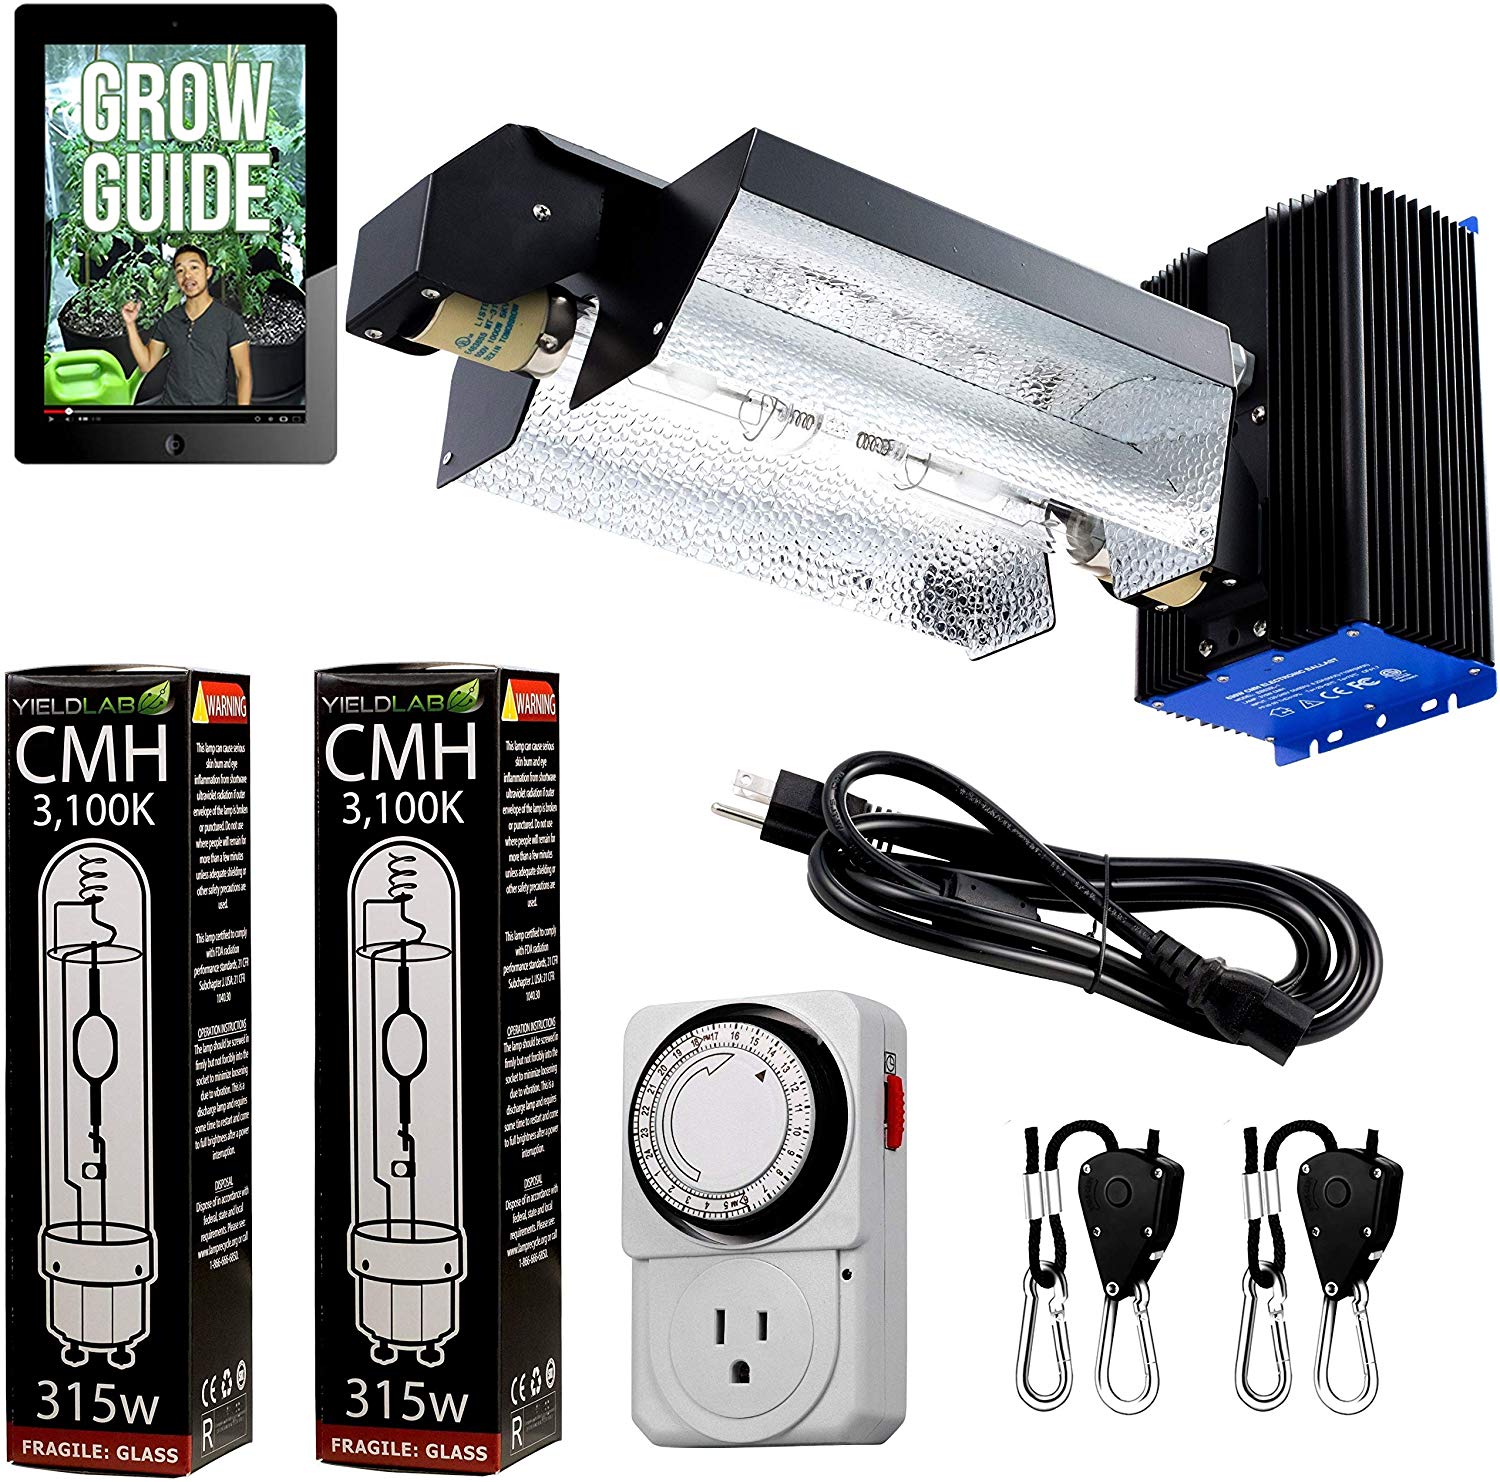 Yield Lab 630w Dual Bulb CMH Open Wing Complete Grow Light Kit